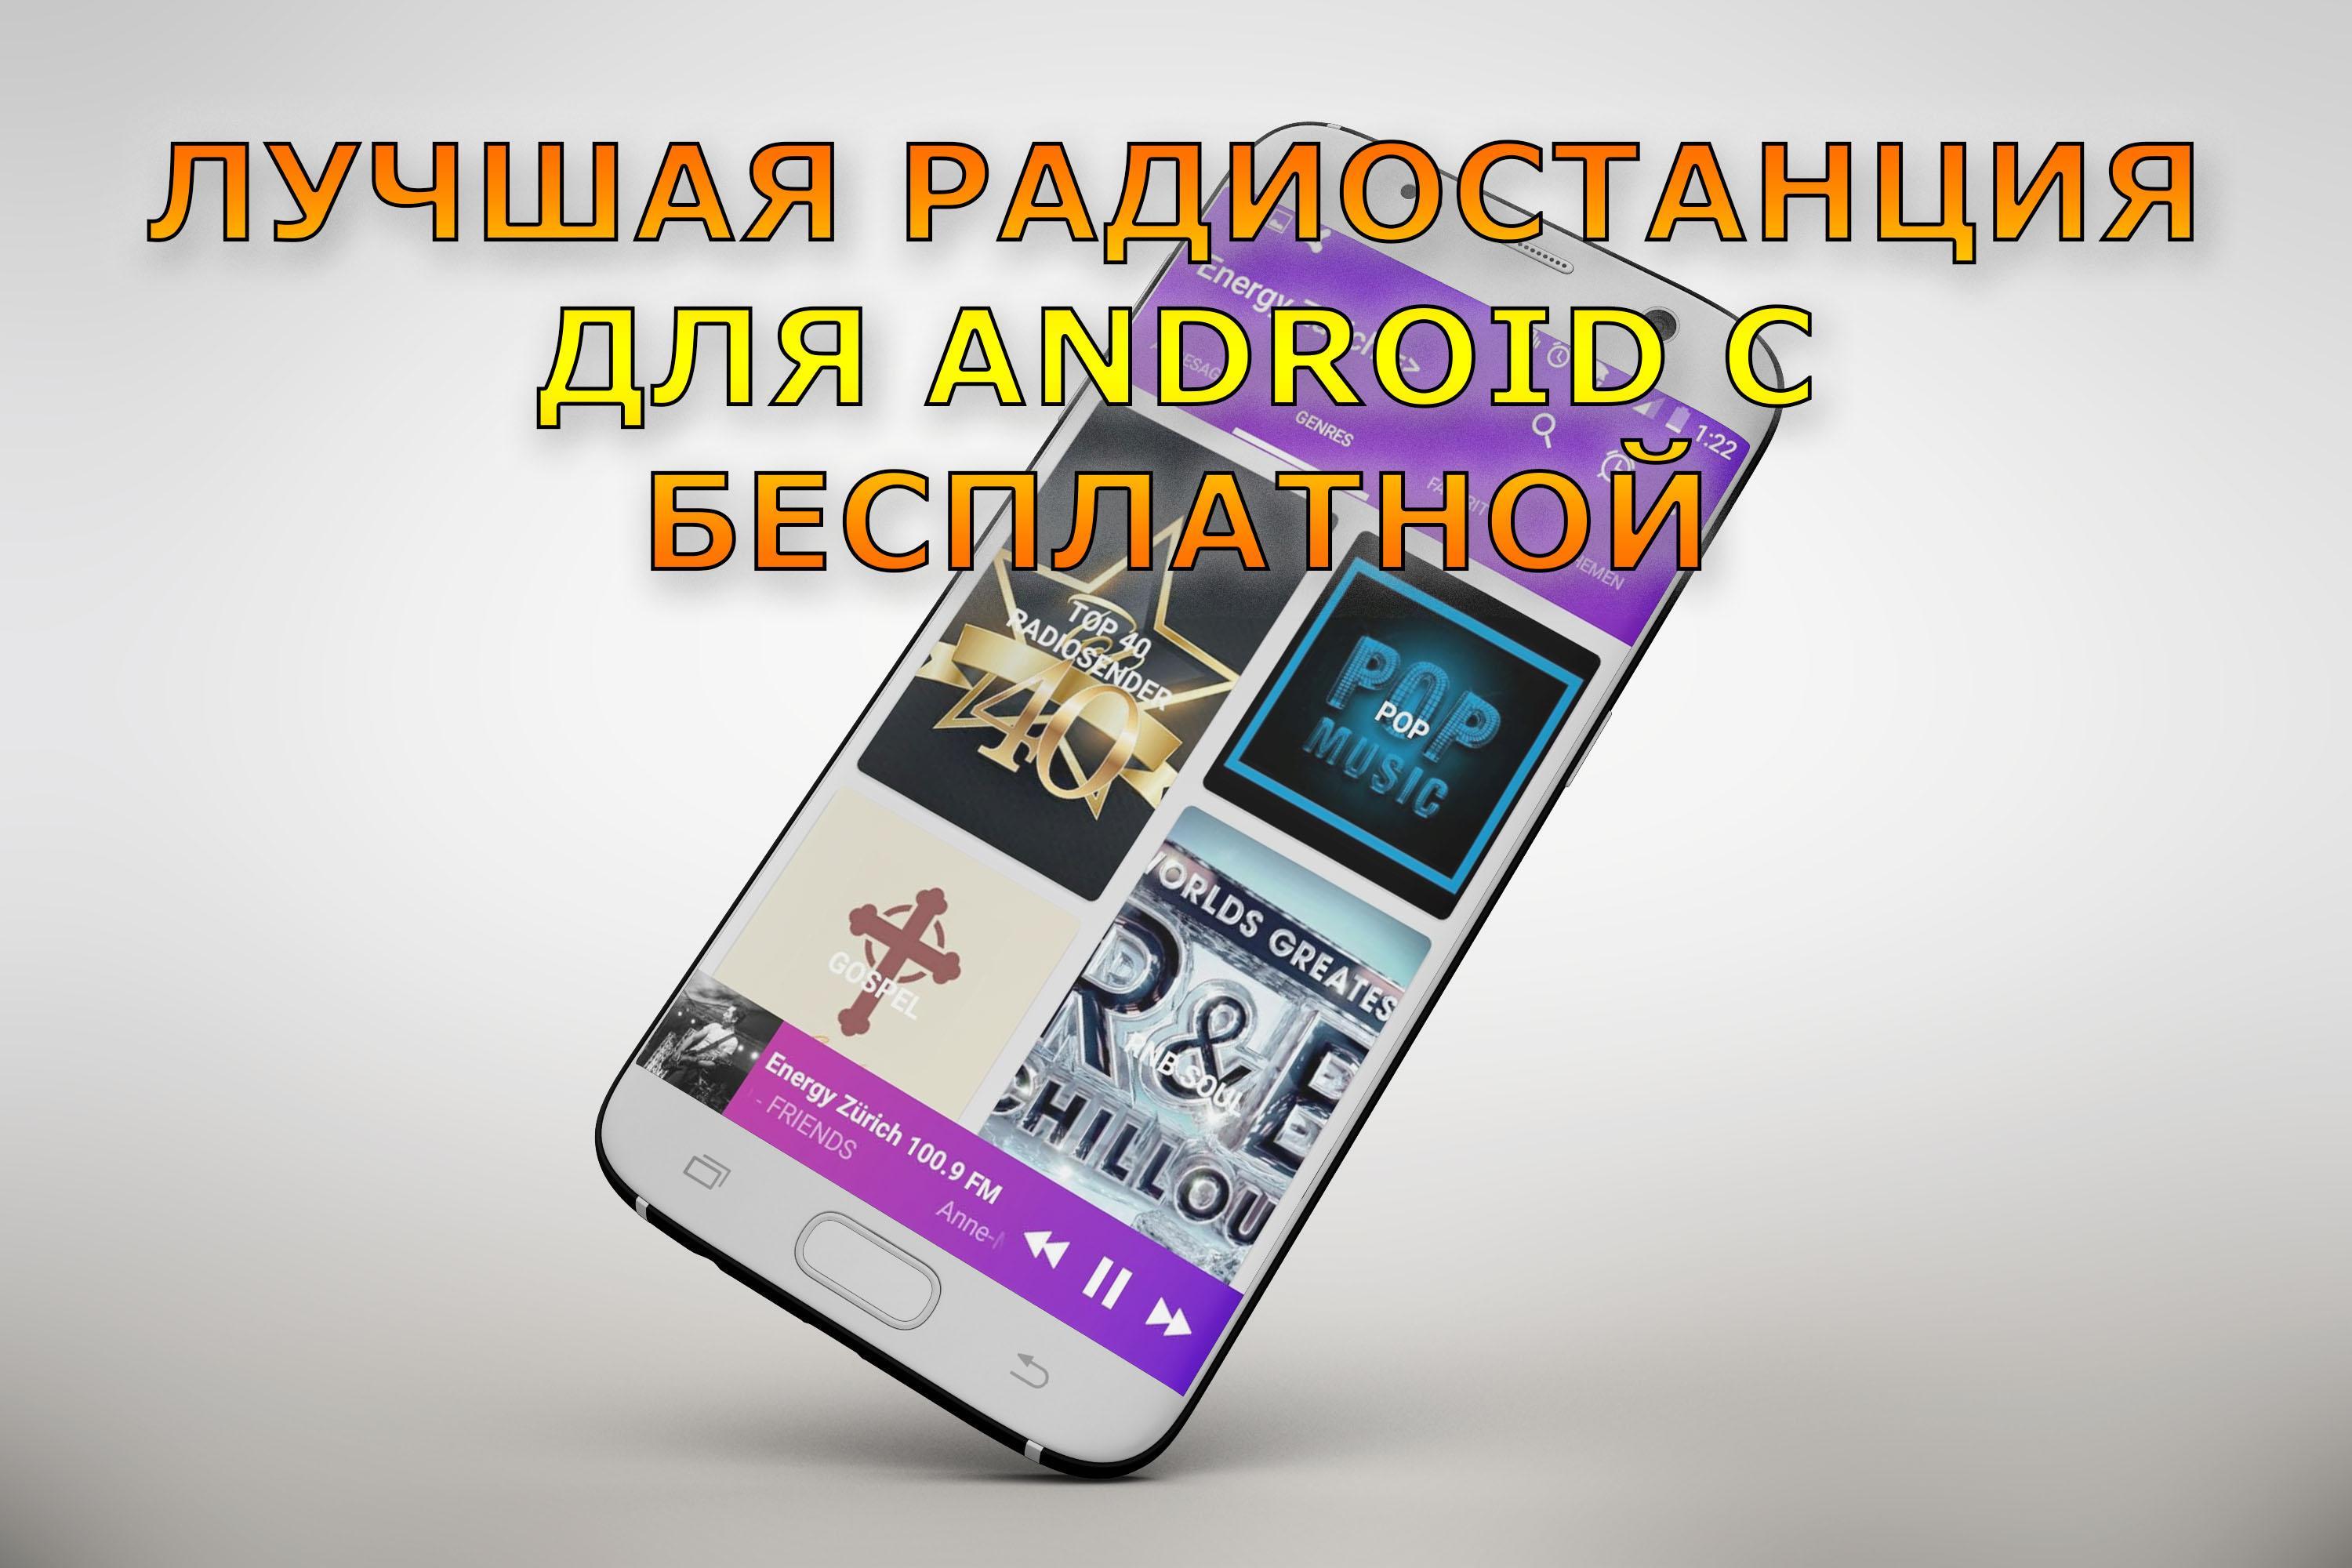 Европа Плюс 100.5 FM for Android - APK Download